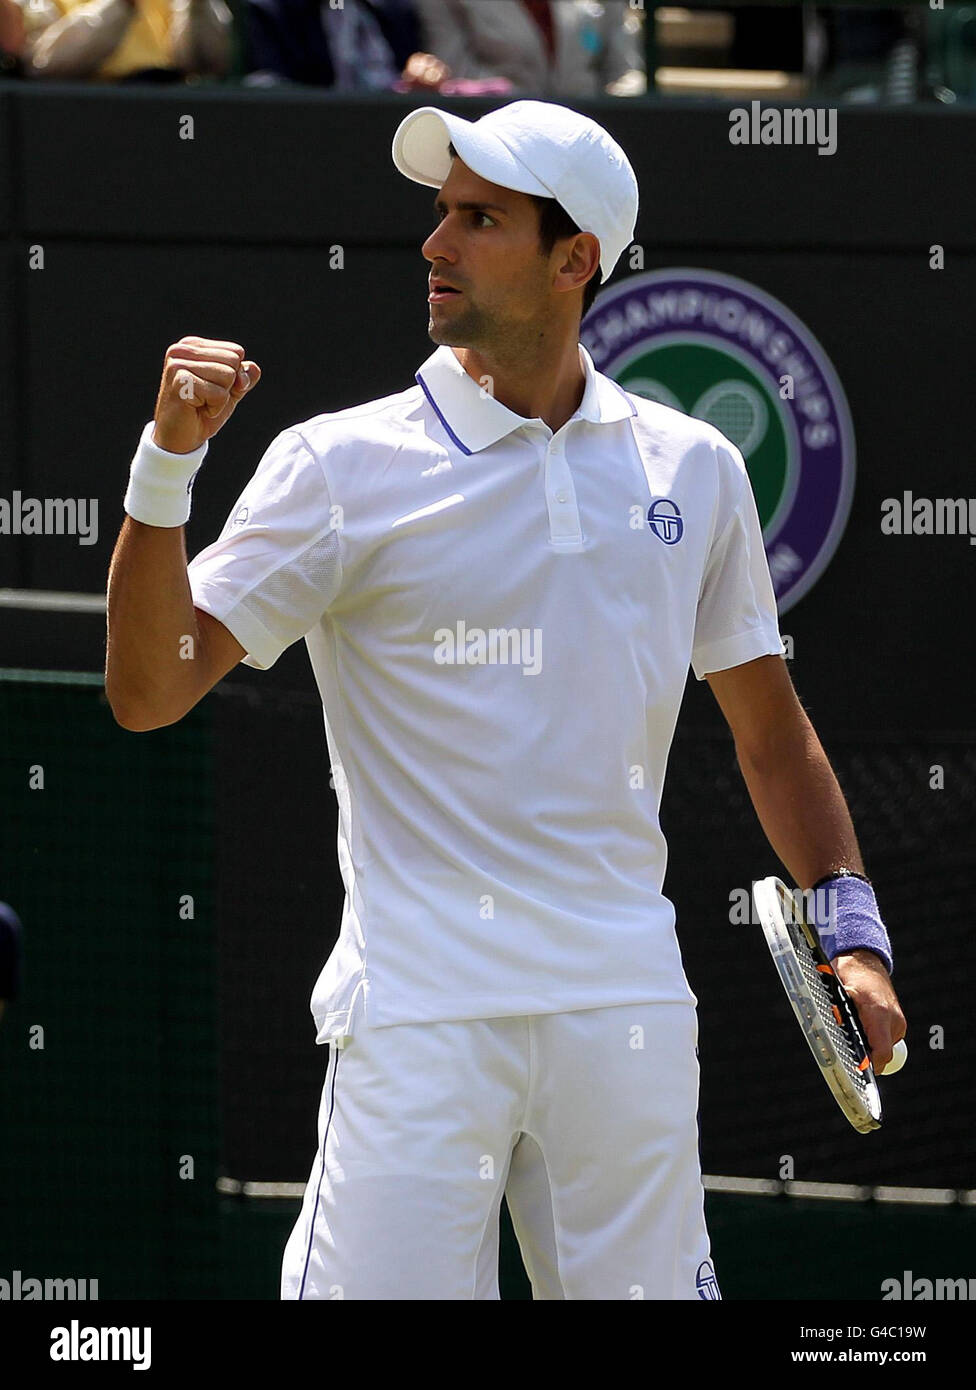 Serbia's Novak Djokovic celebrates against South Africa's Kevin Anderson during Day Four of the 2011 Wimbledon Championships. Stock Photo